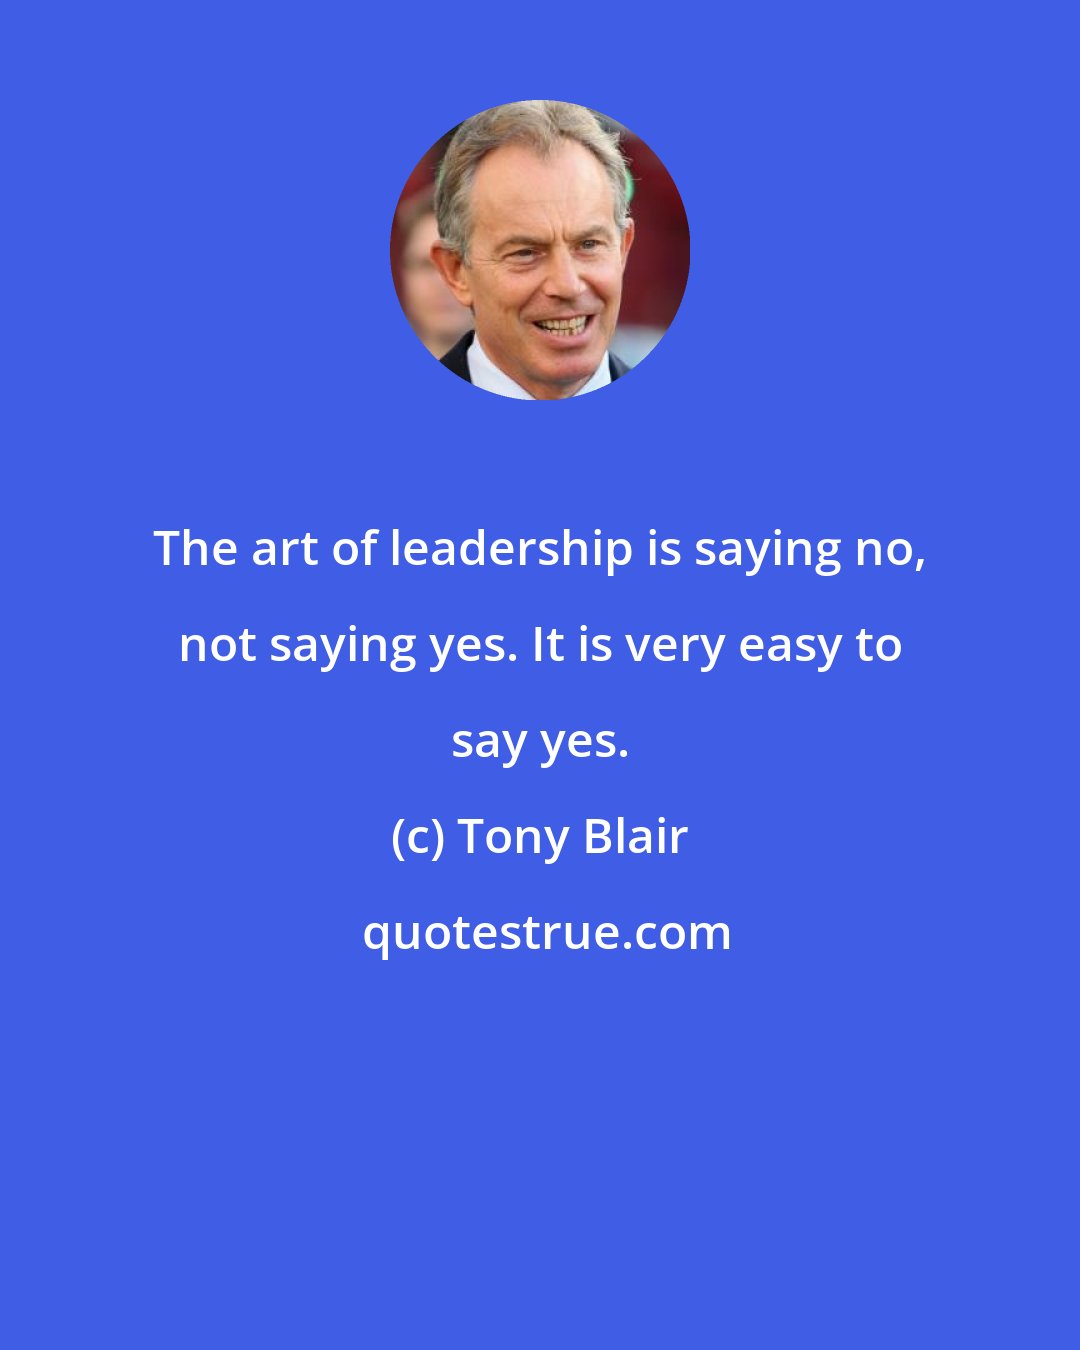 Tony Blair: The art of leadership is saying no, not saying yes. It is very easy to say yes.